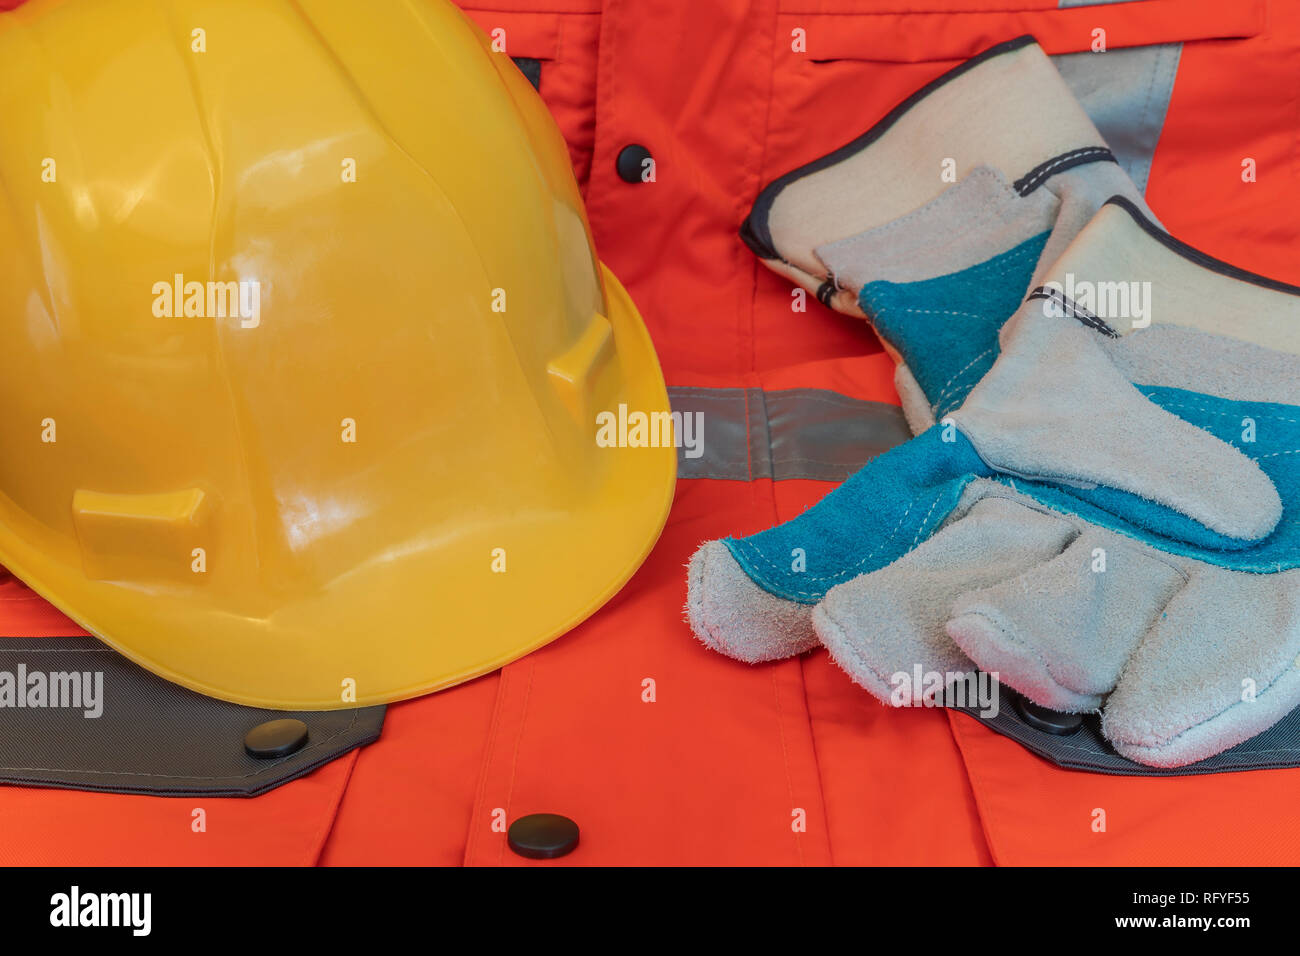 Workplace safety equipment that is mandatory for certain high-risk jobs Stock Photo